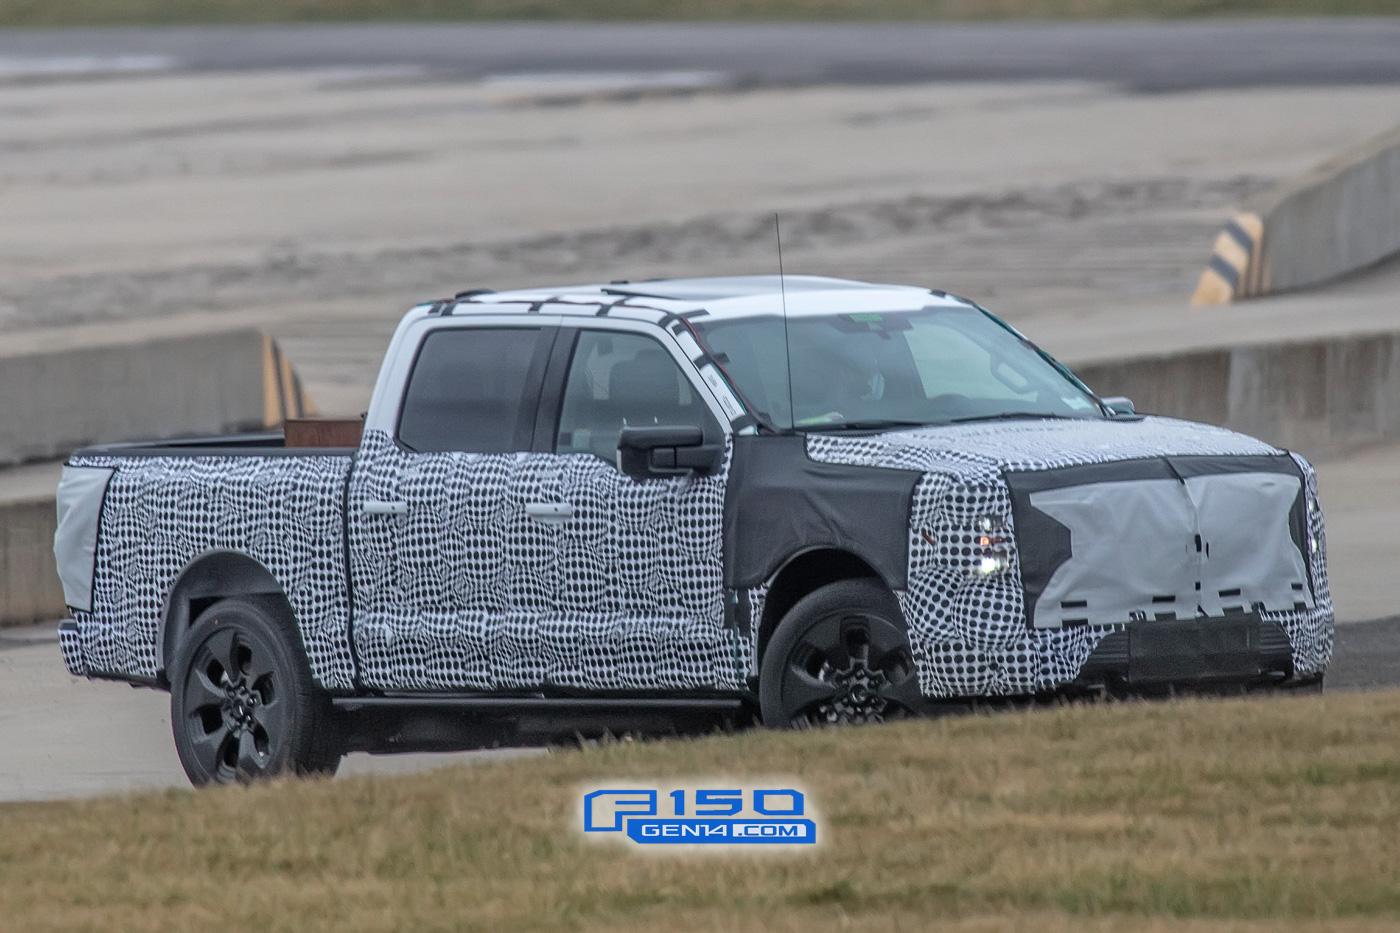 Ford F-150 Lightning Electric F-150 Prototype Caught With Large Mach-E-Style Infotainment Screen ev-f150-electric-mache-large-infotainment-screen-24